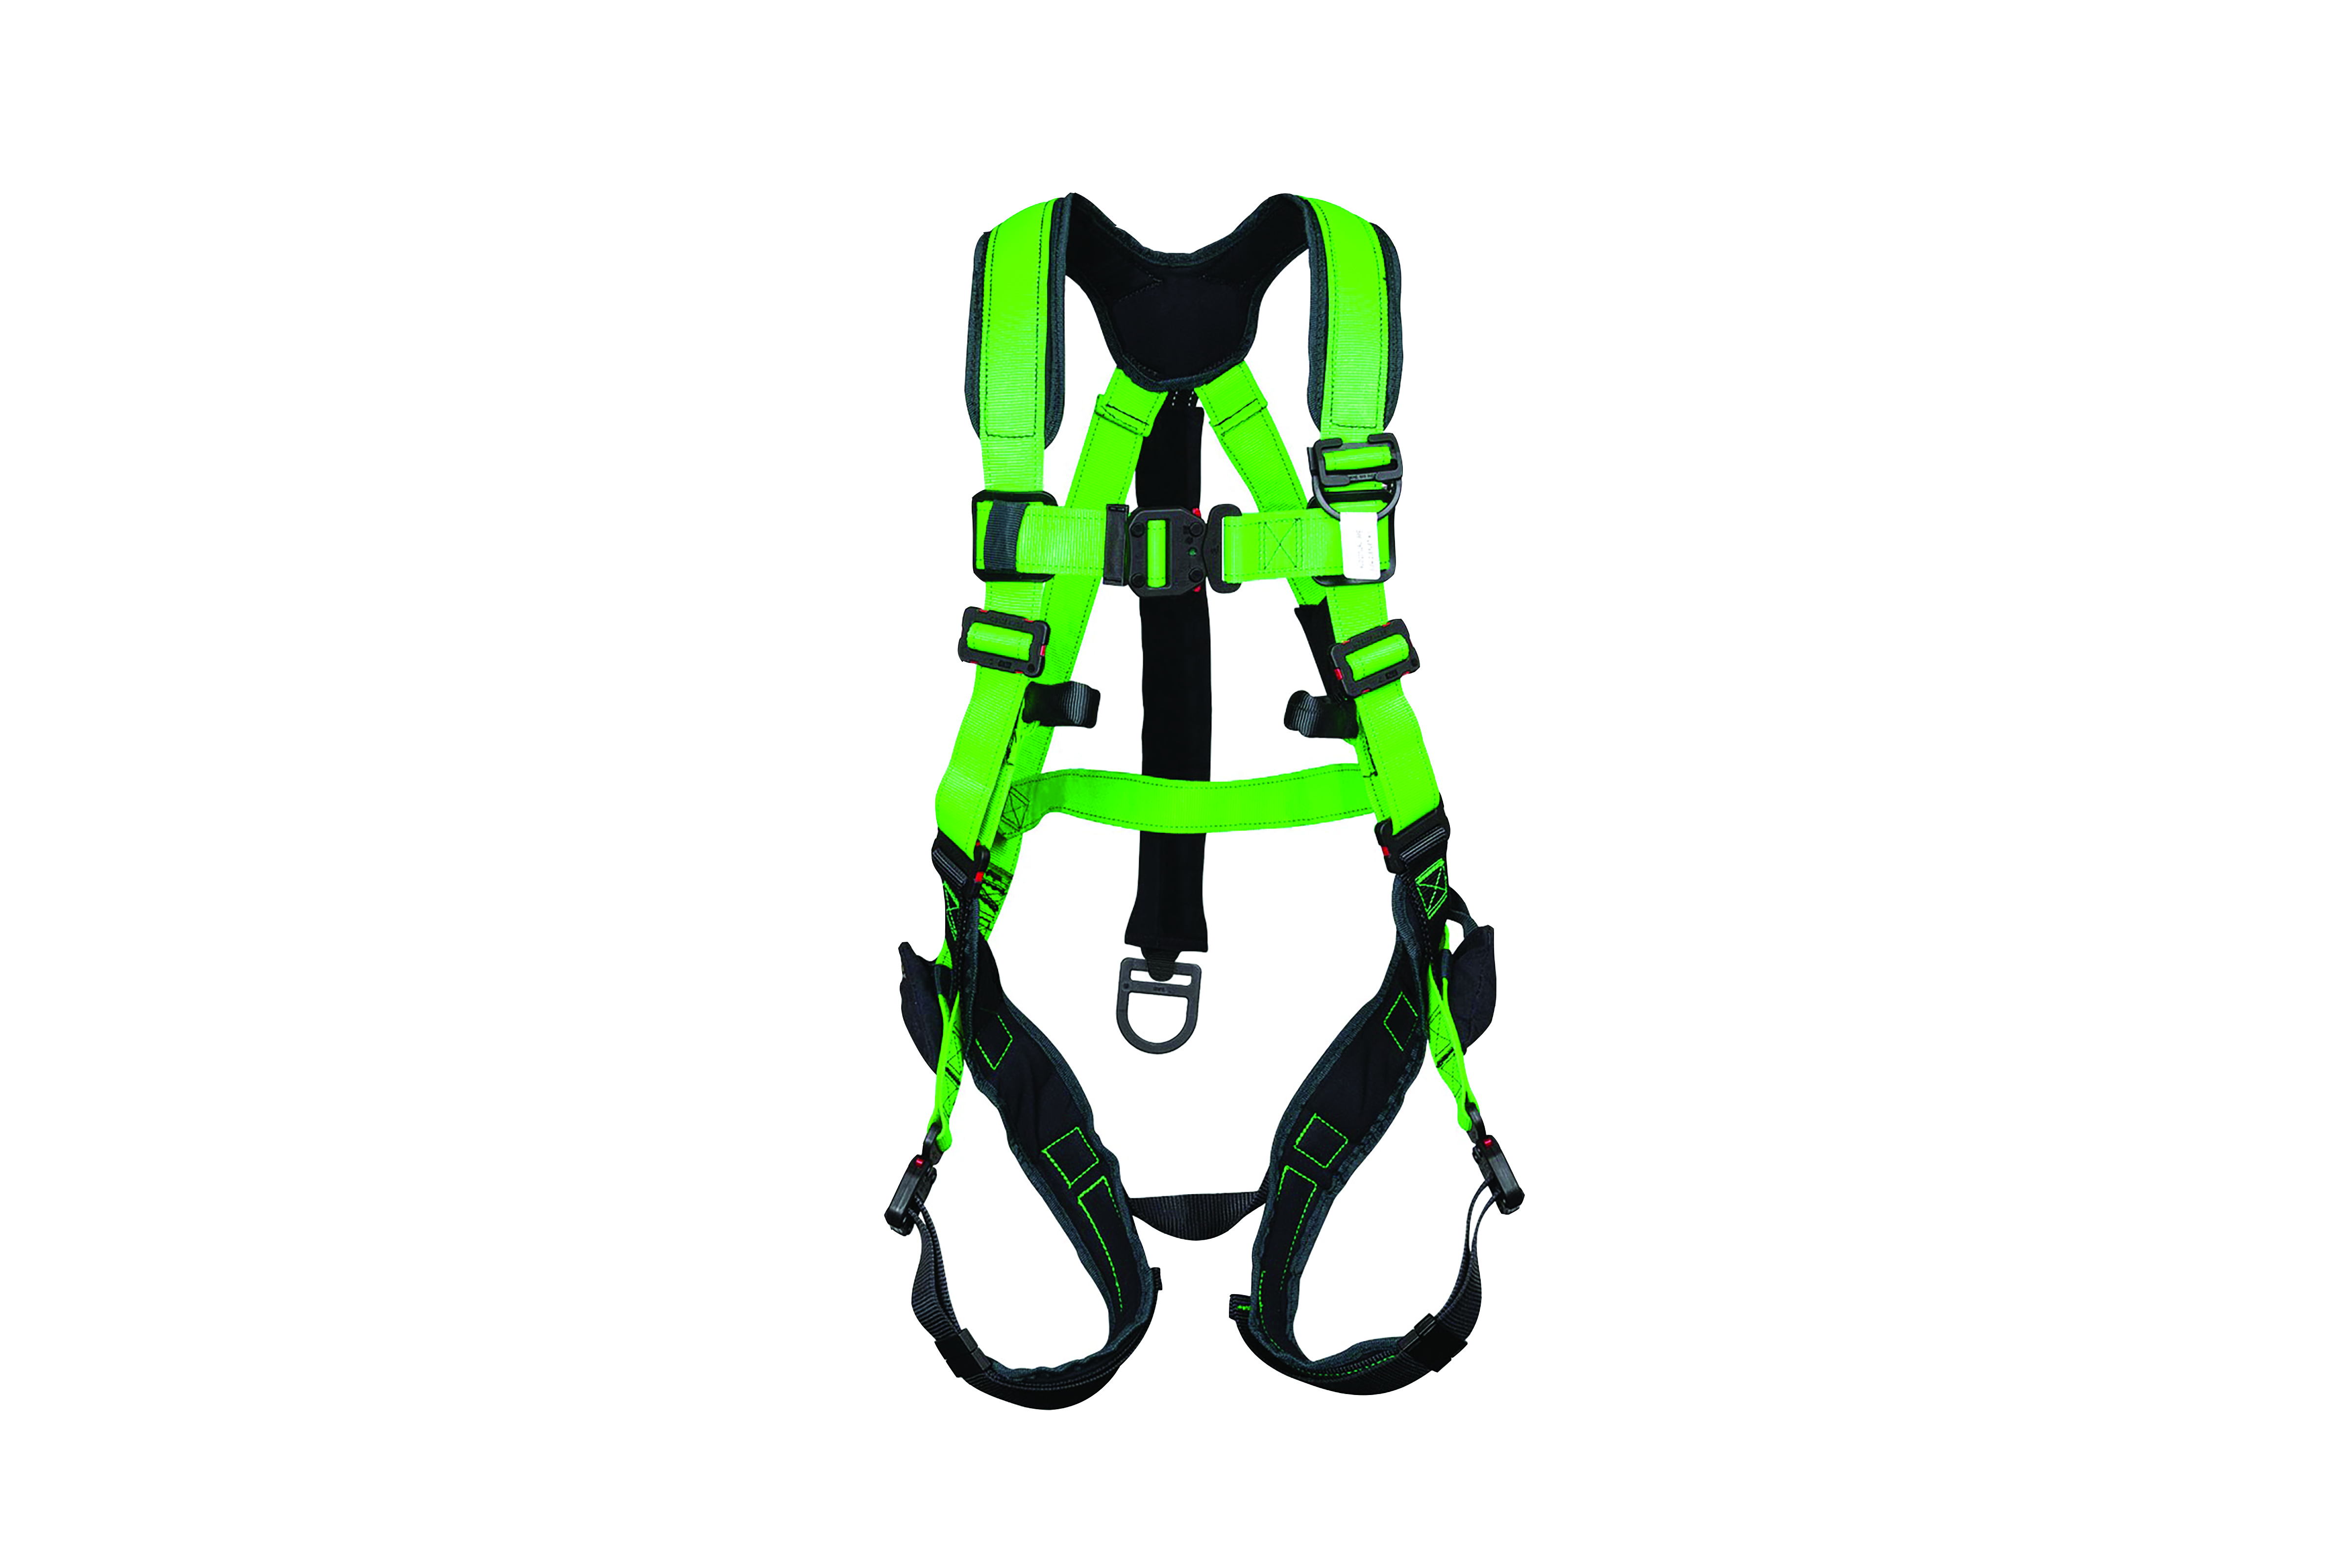 A bright green and black harness. Image by Buckingham.